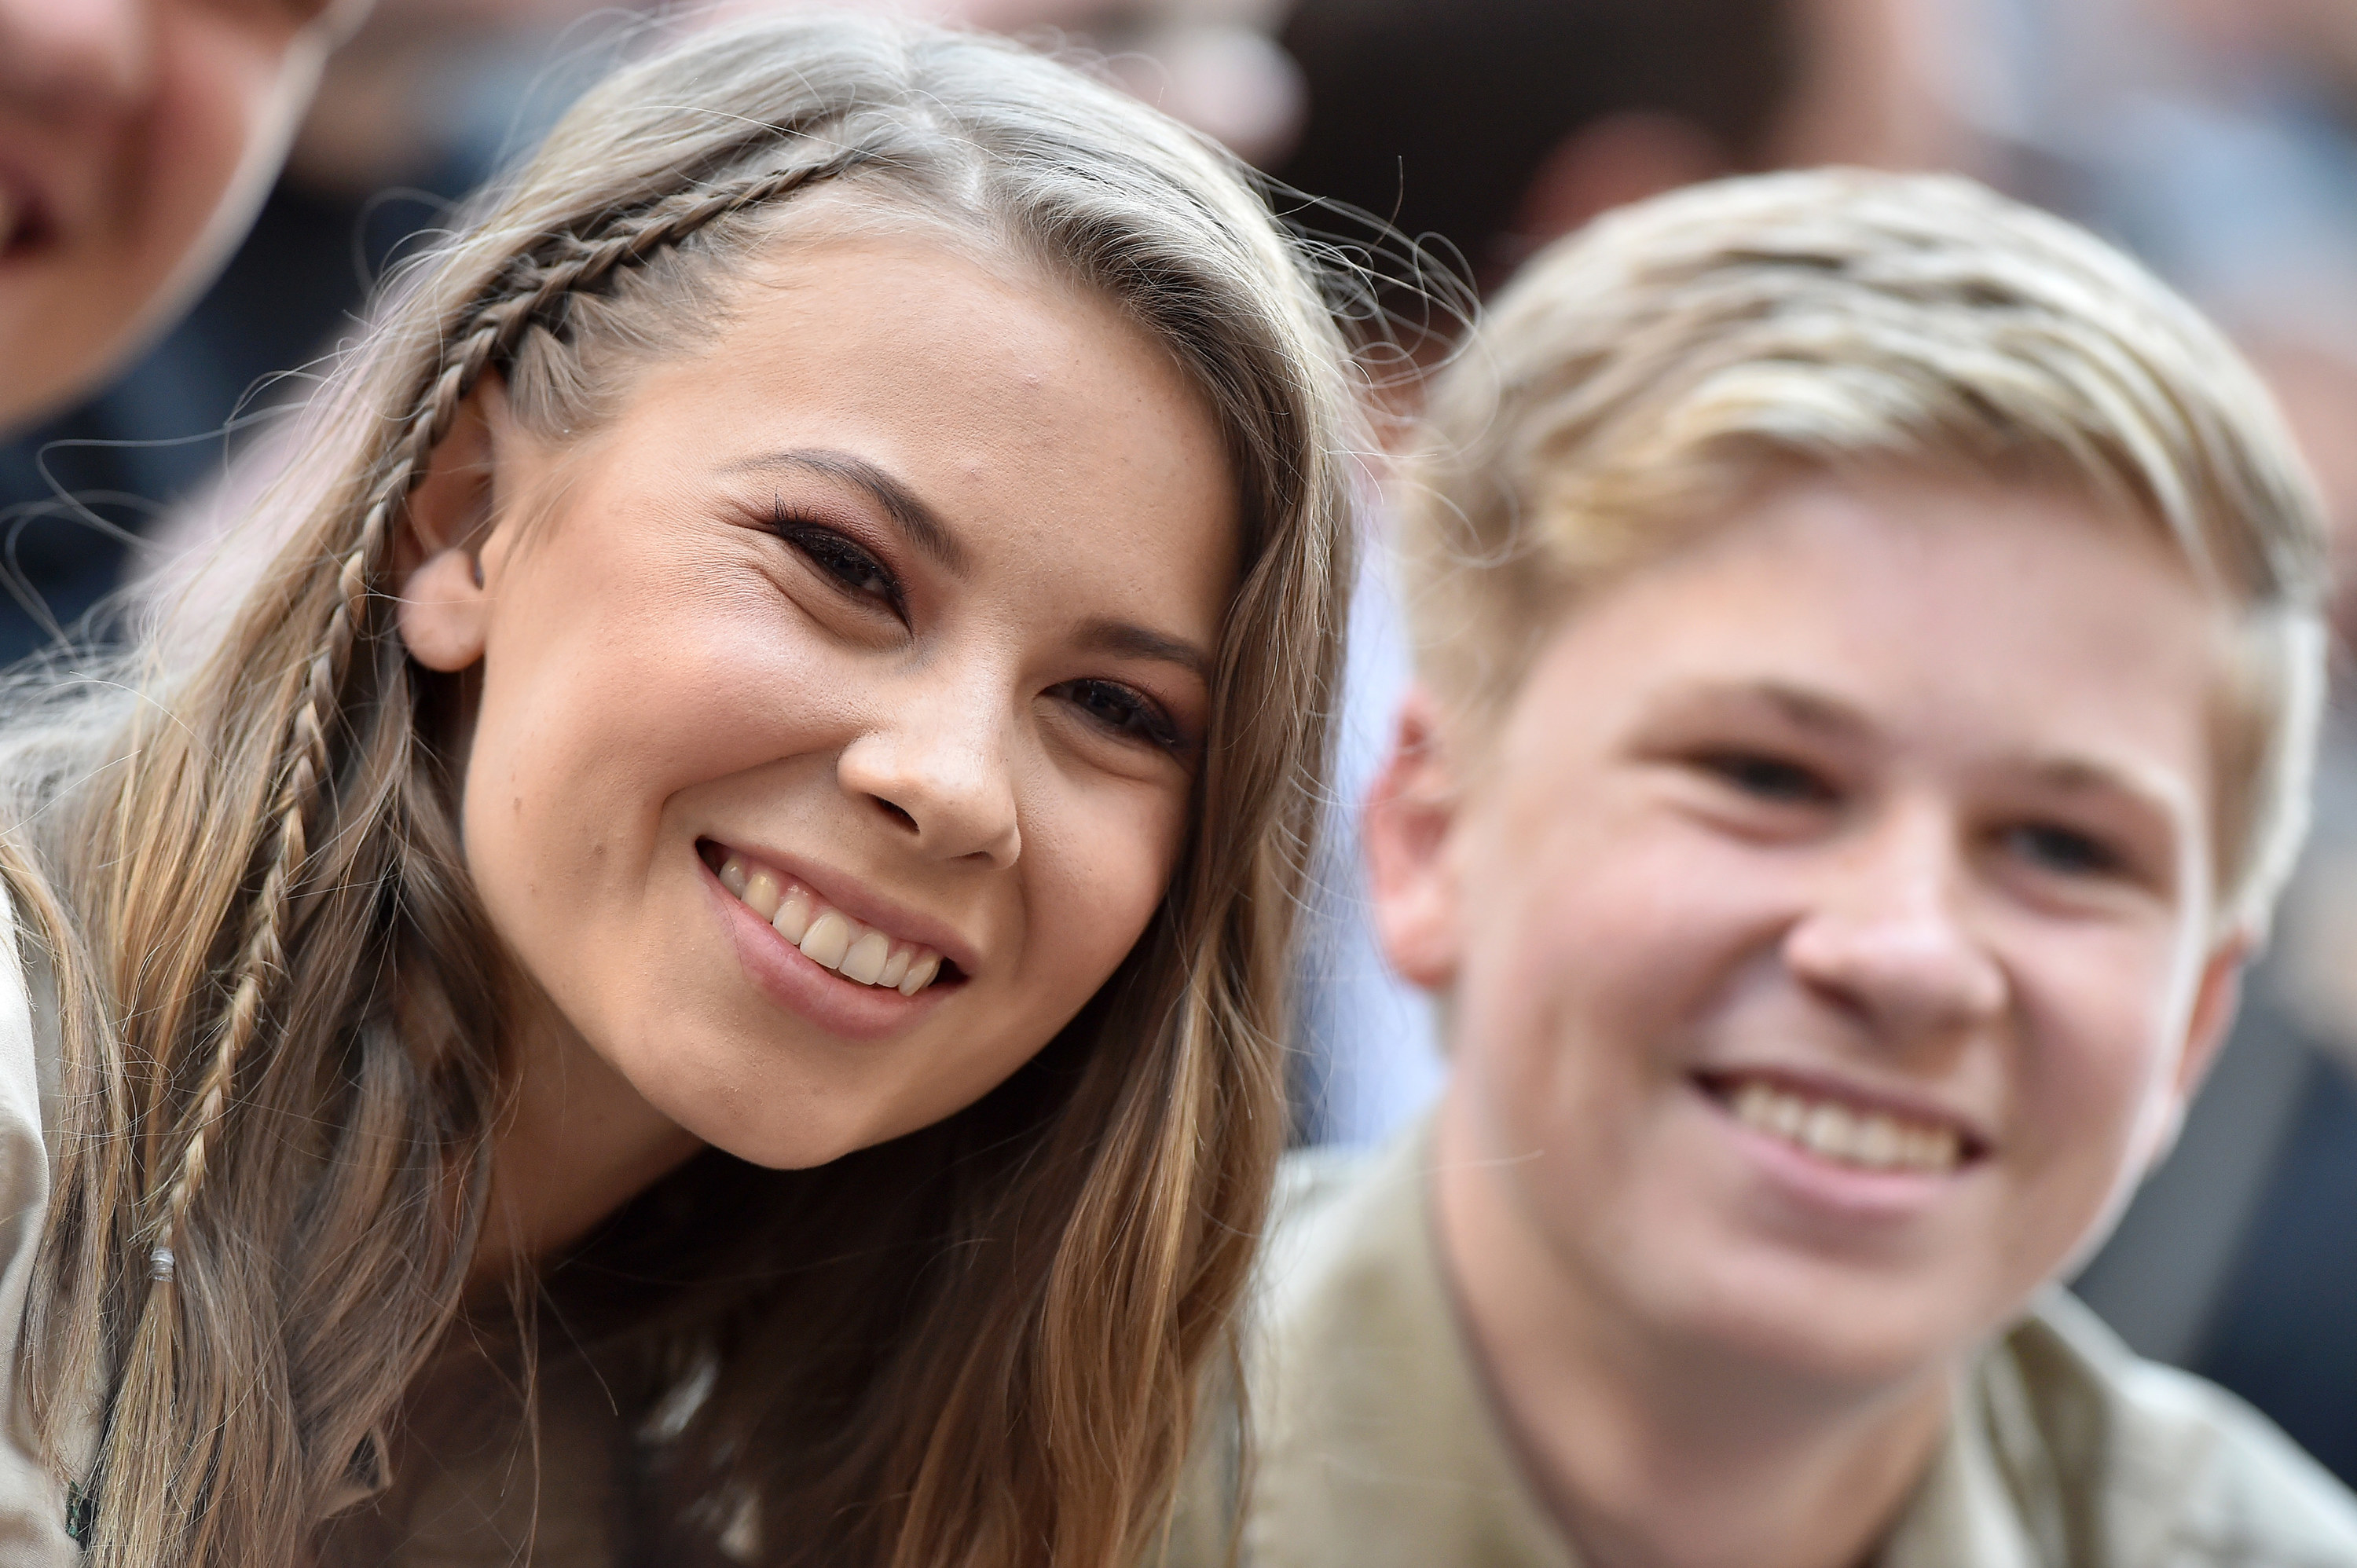 Bindi Irwin and Robert Irwin attend the ceremony honoring Steve Irwin with star on the Hollywood Walk of Fame on April 26, 2018 in Hollywood, California